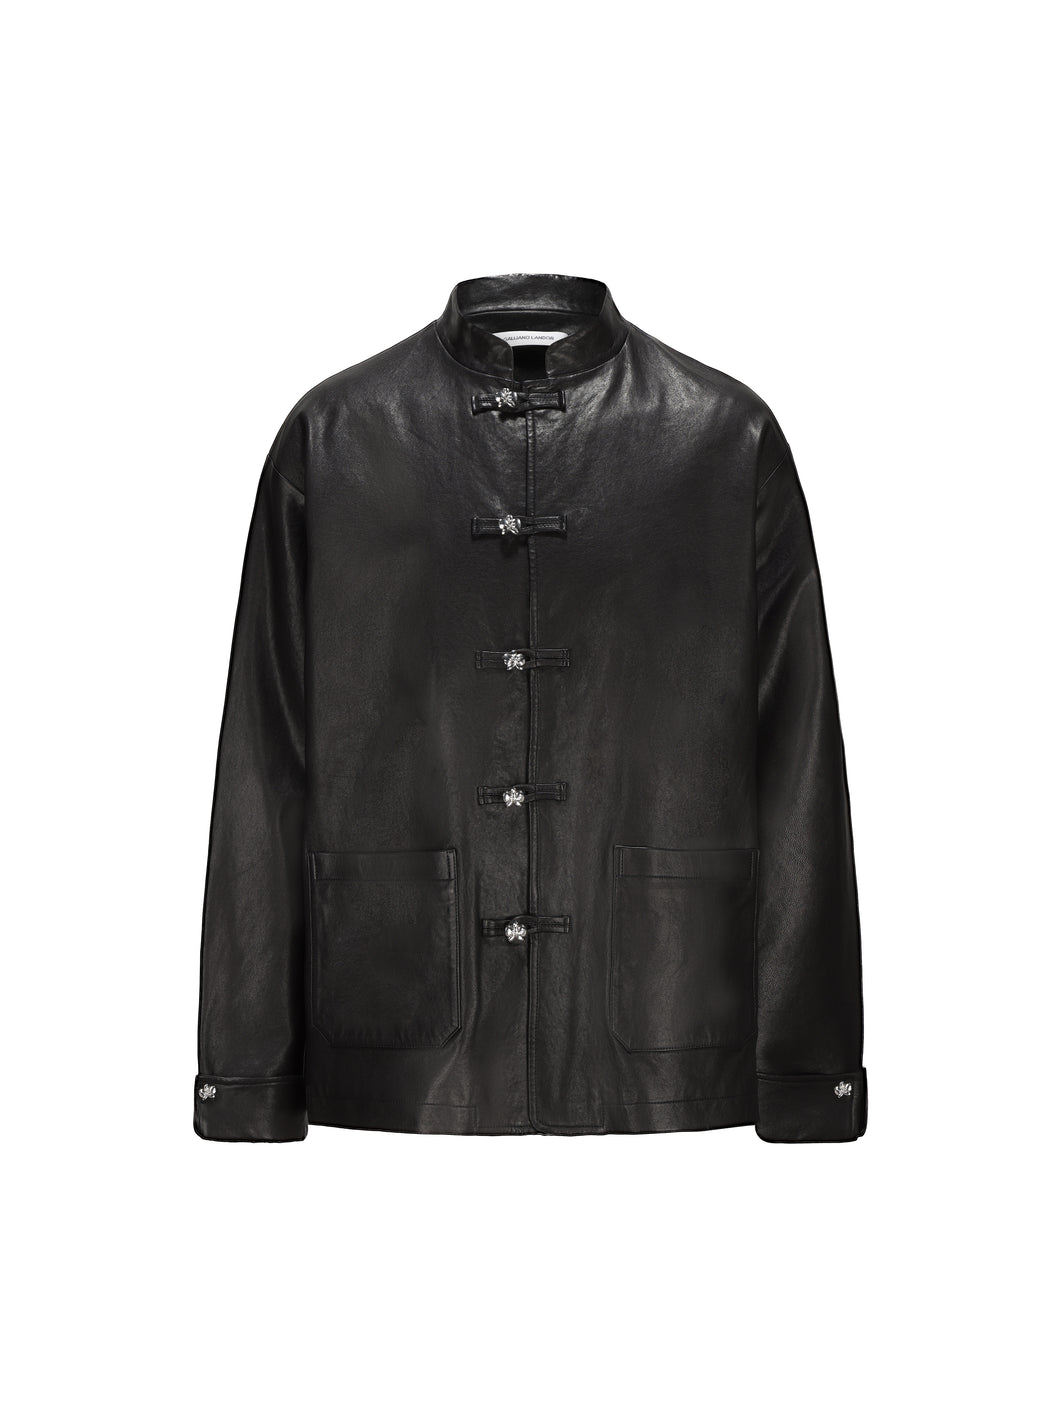 Black Leather Tang Suit Jacket